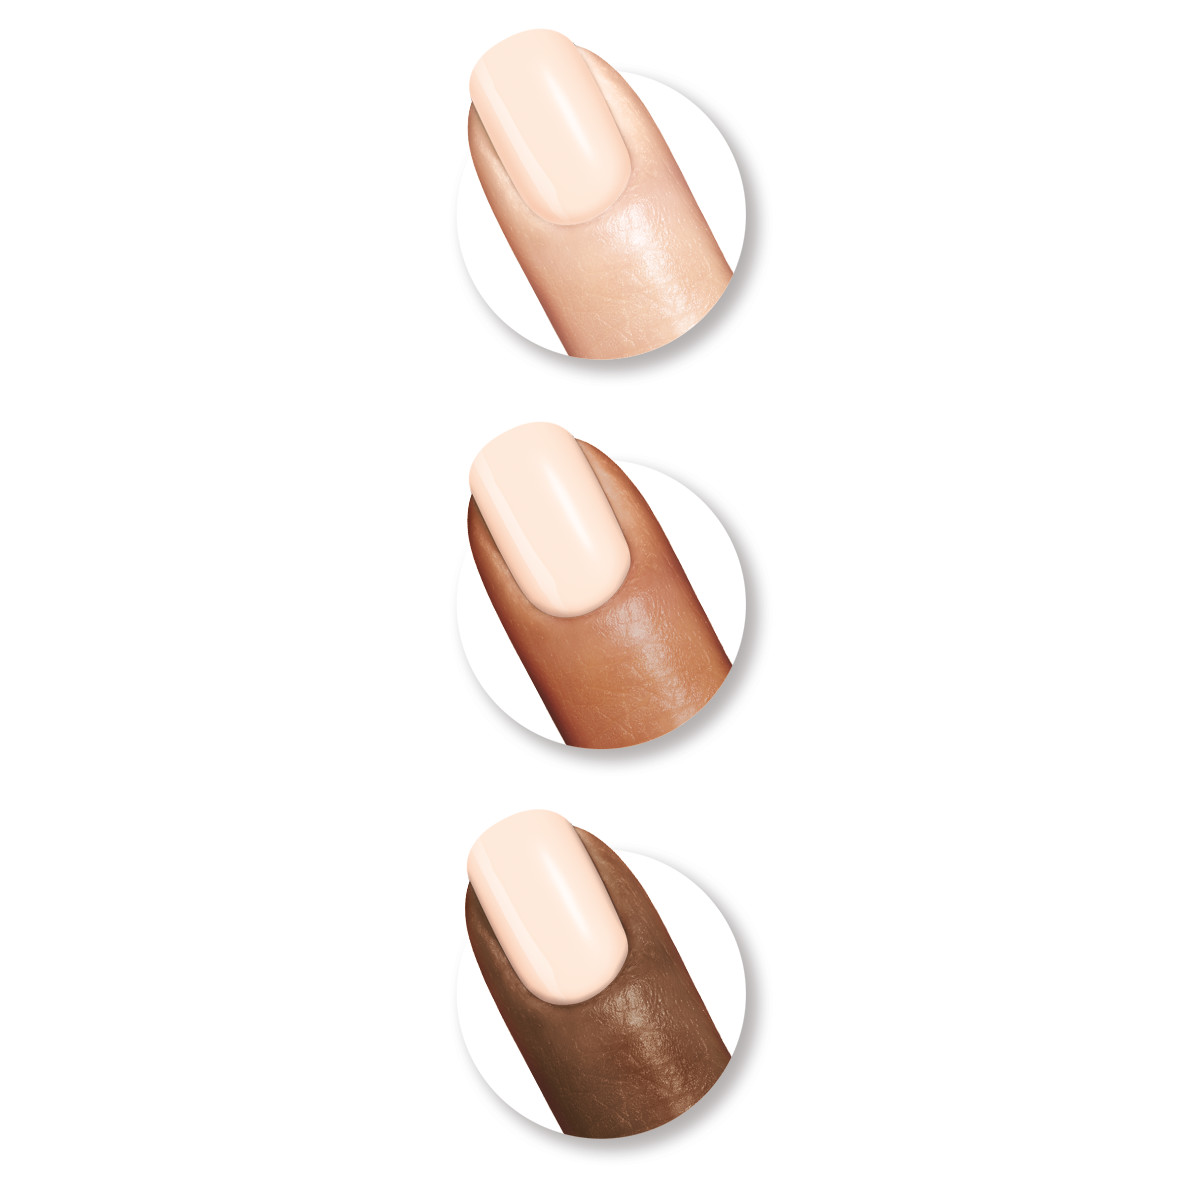 Sally Hansen Complete Salon Manicure Nail Color, Sweet Talker - image 3 of 3